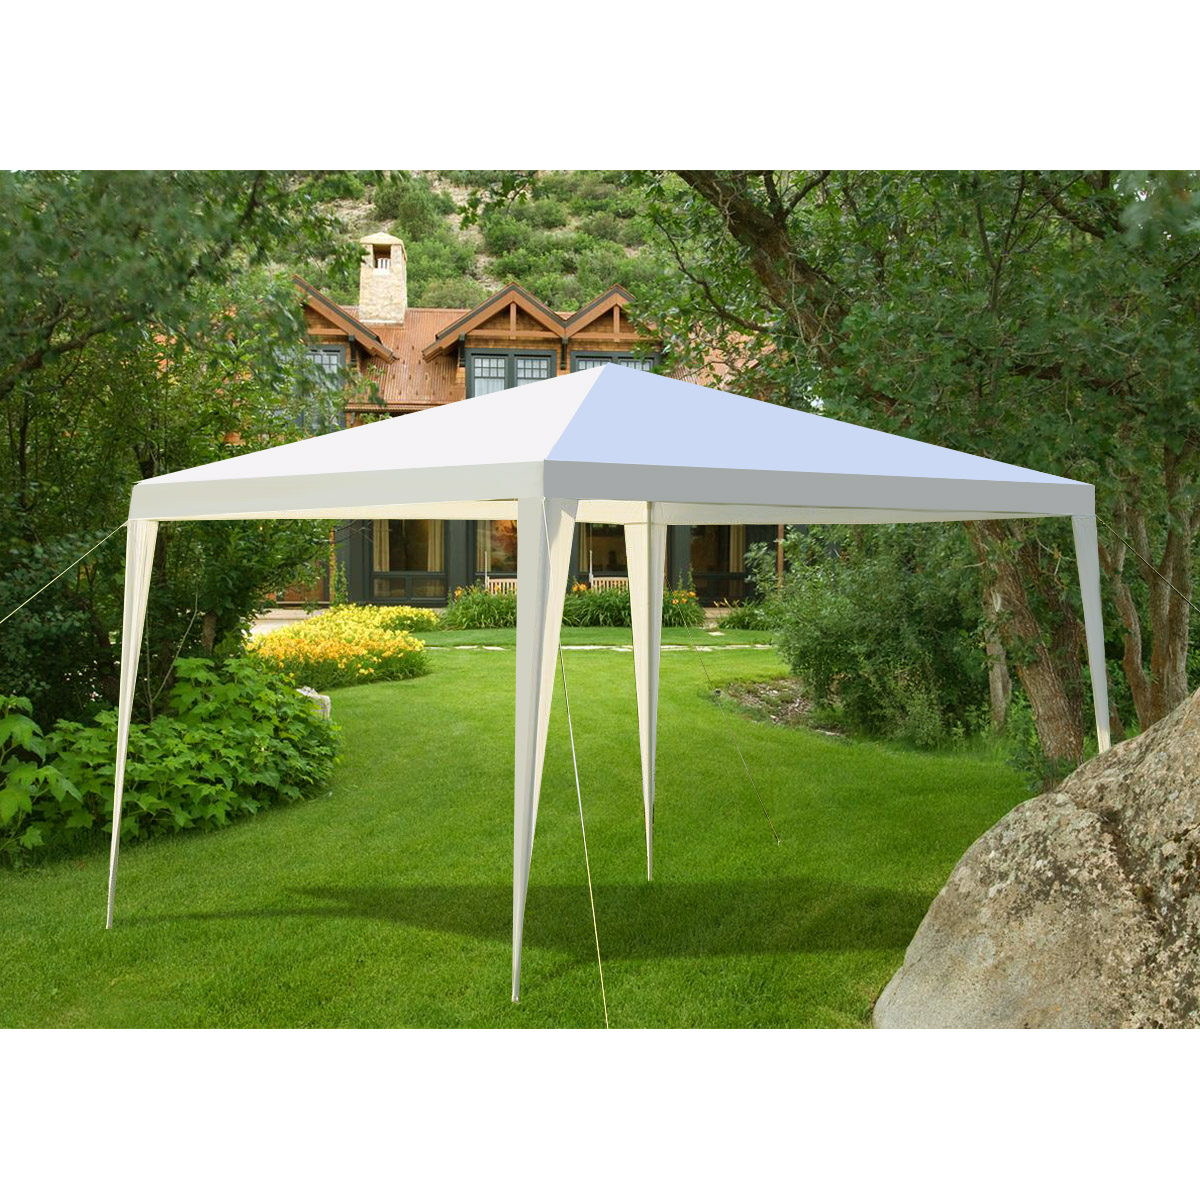 10'x10' Outdoor Heavy Duty Canopy Party Wedding Tent Gazebo Pavilion Cater Event